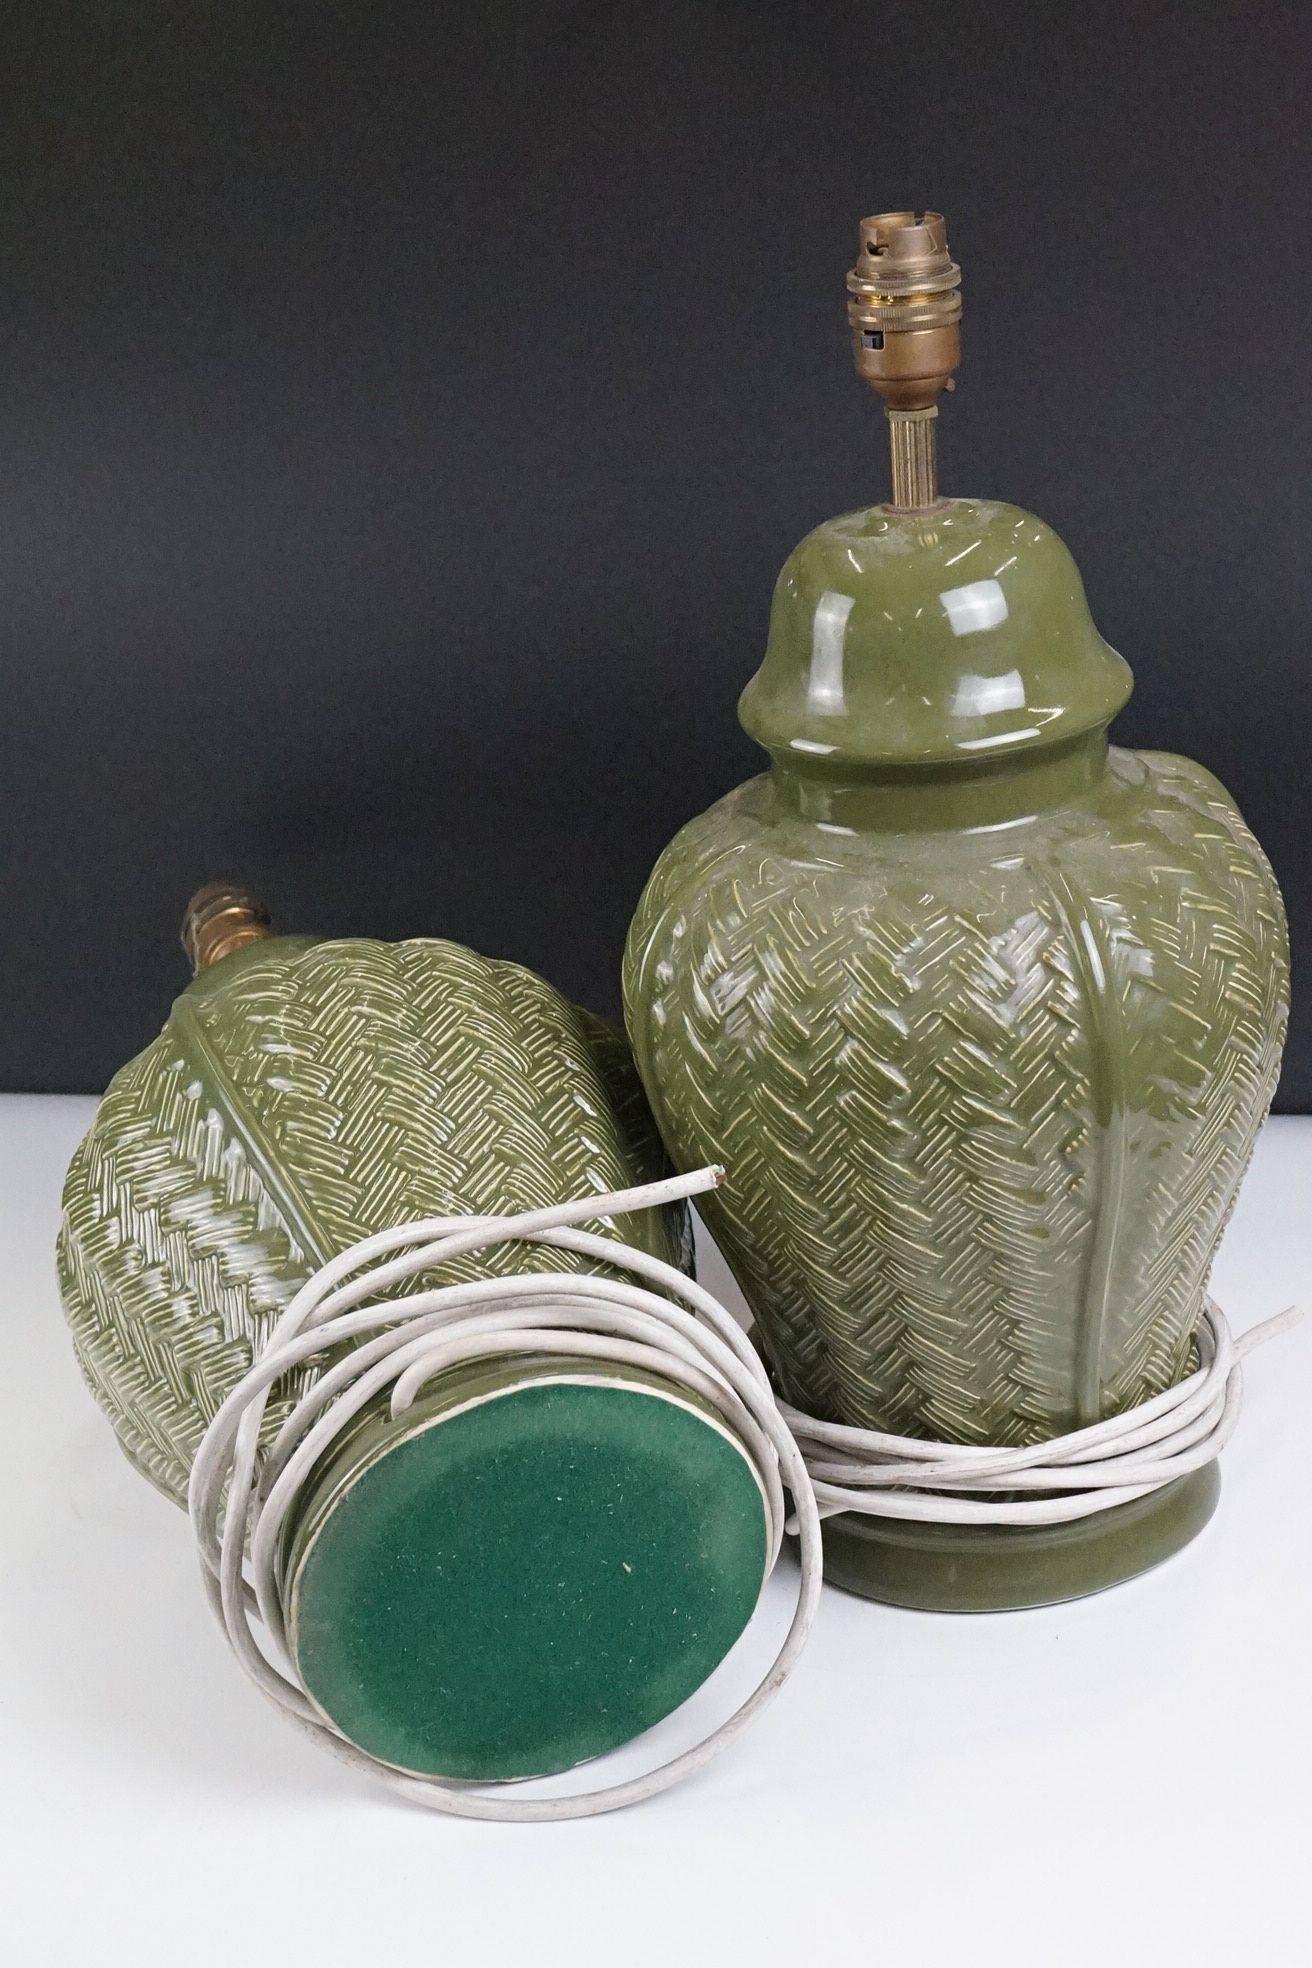 Pair of Green Glazed Baluster-shaped Table Lamps with moulded basket weave pattern, 40cm high with - Image 5 of 5